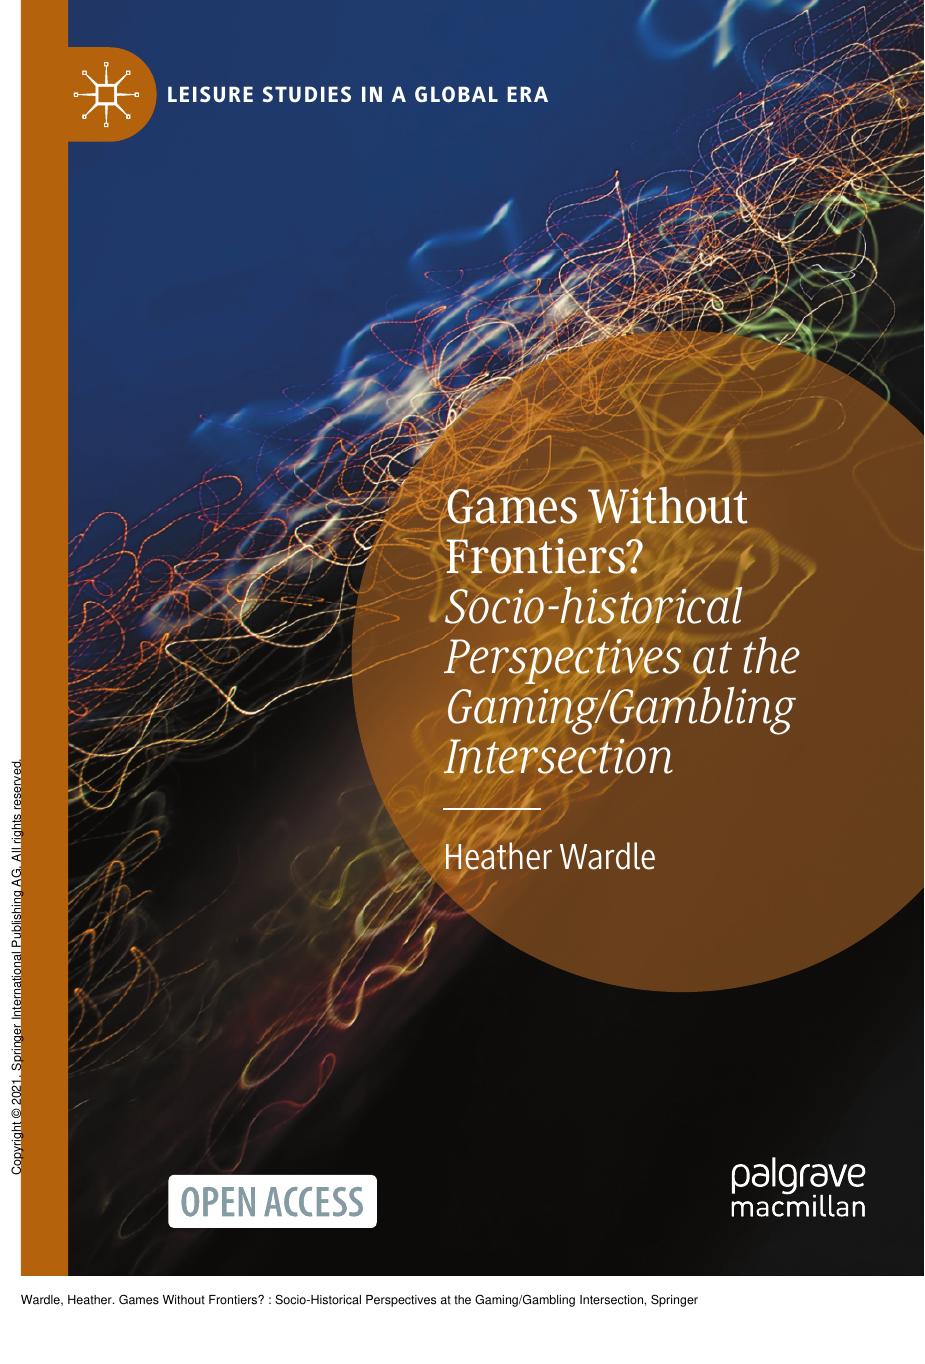 Games Without Frontiers? : Socio-Historical Perspectives at the Gaming/Gambling Intersection by Heather Wardle